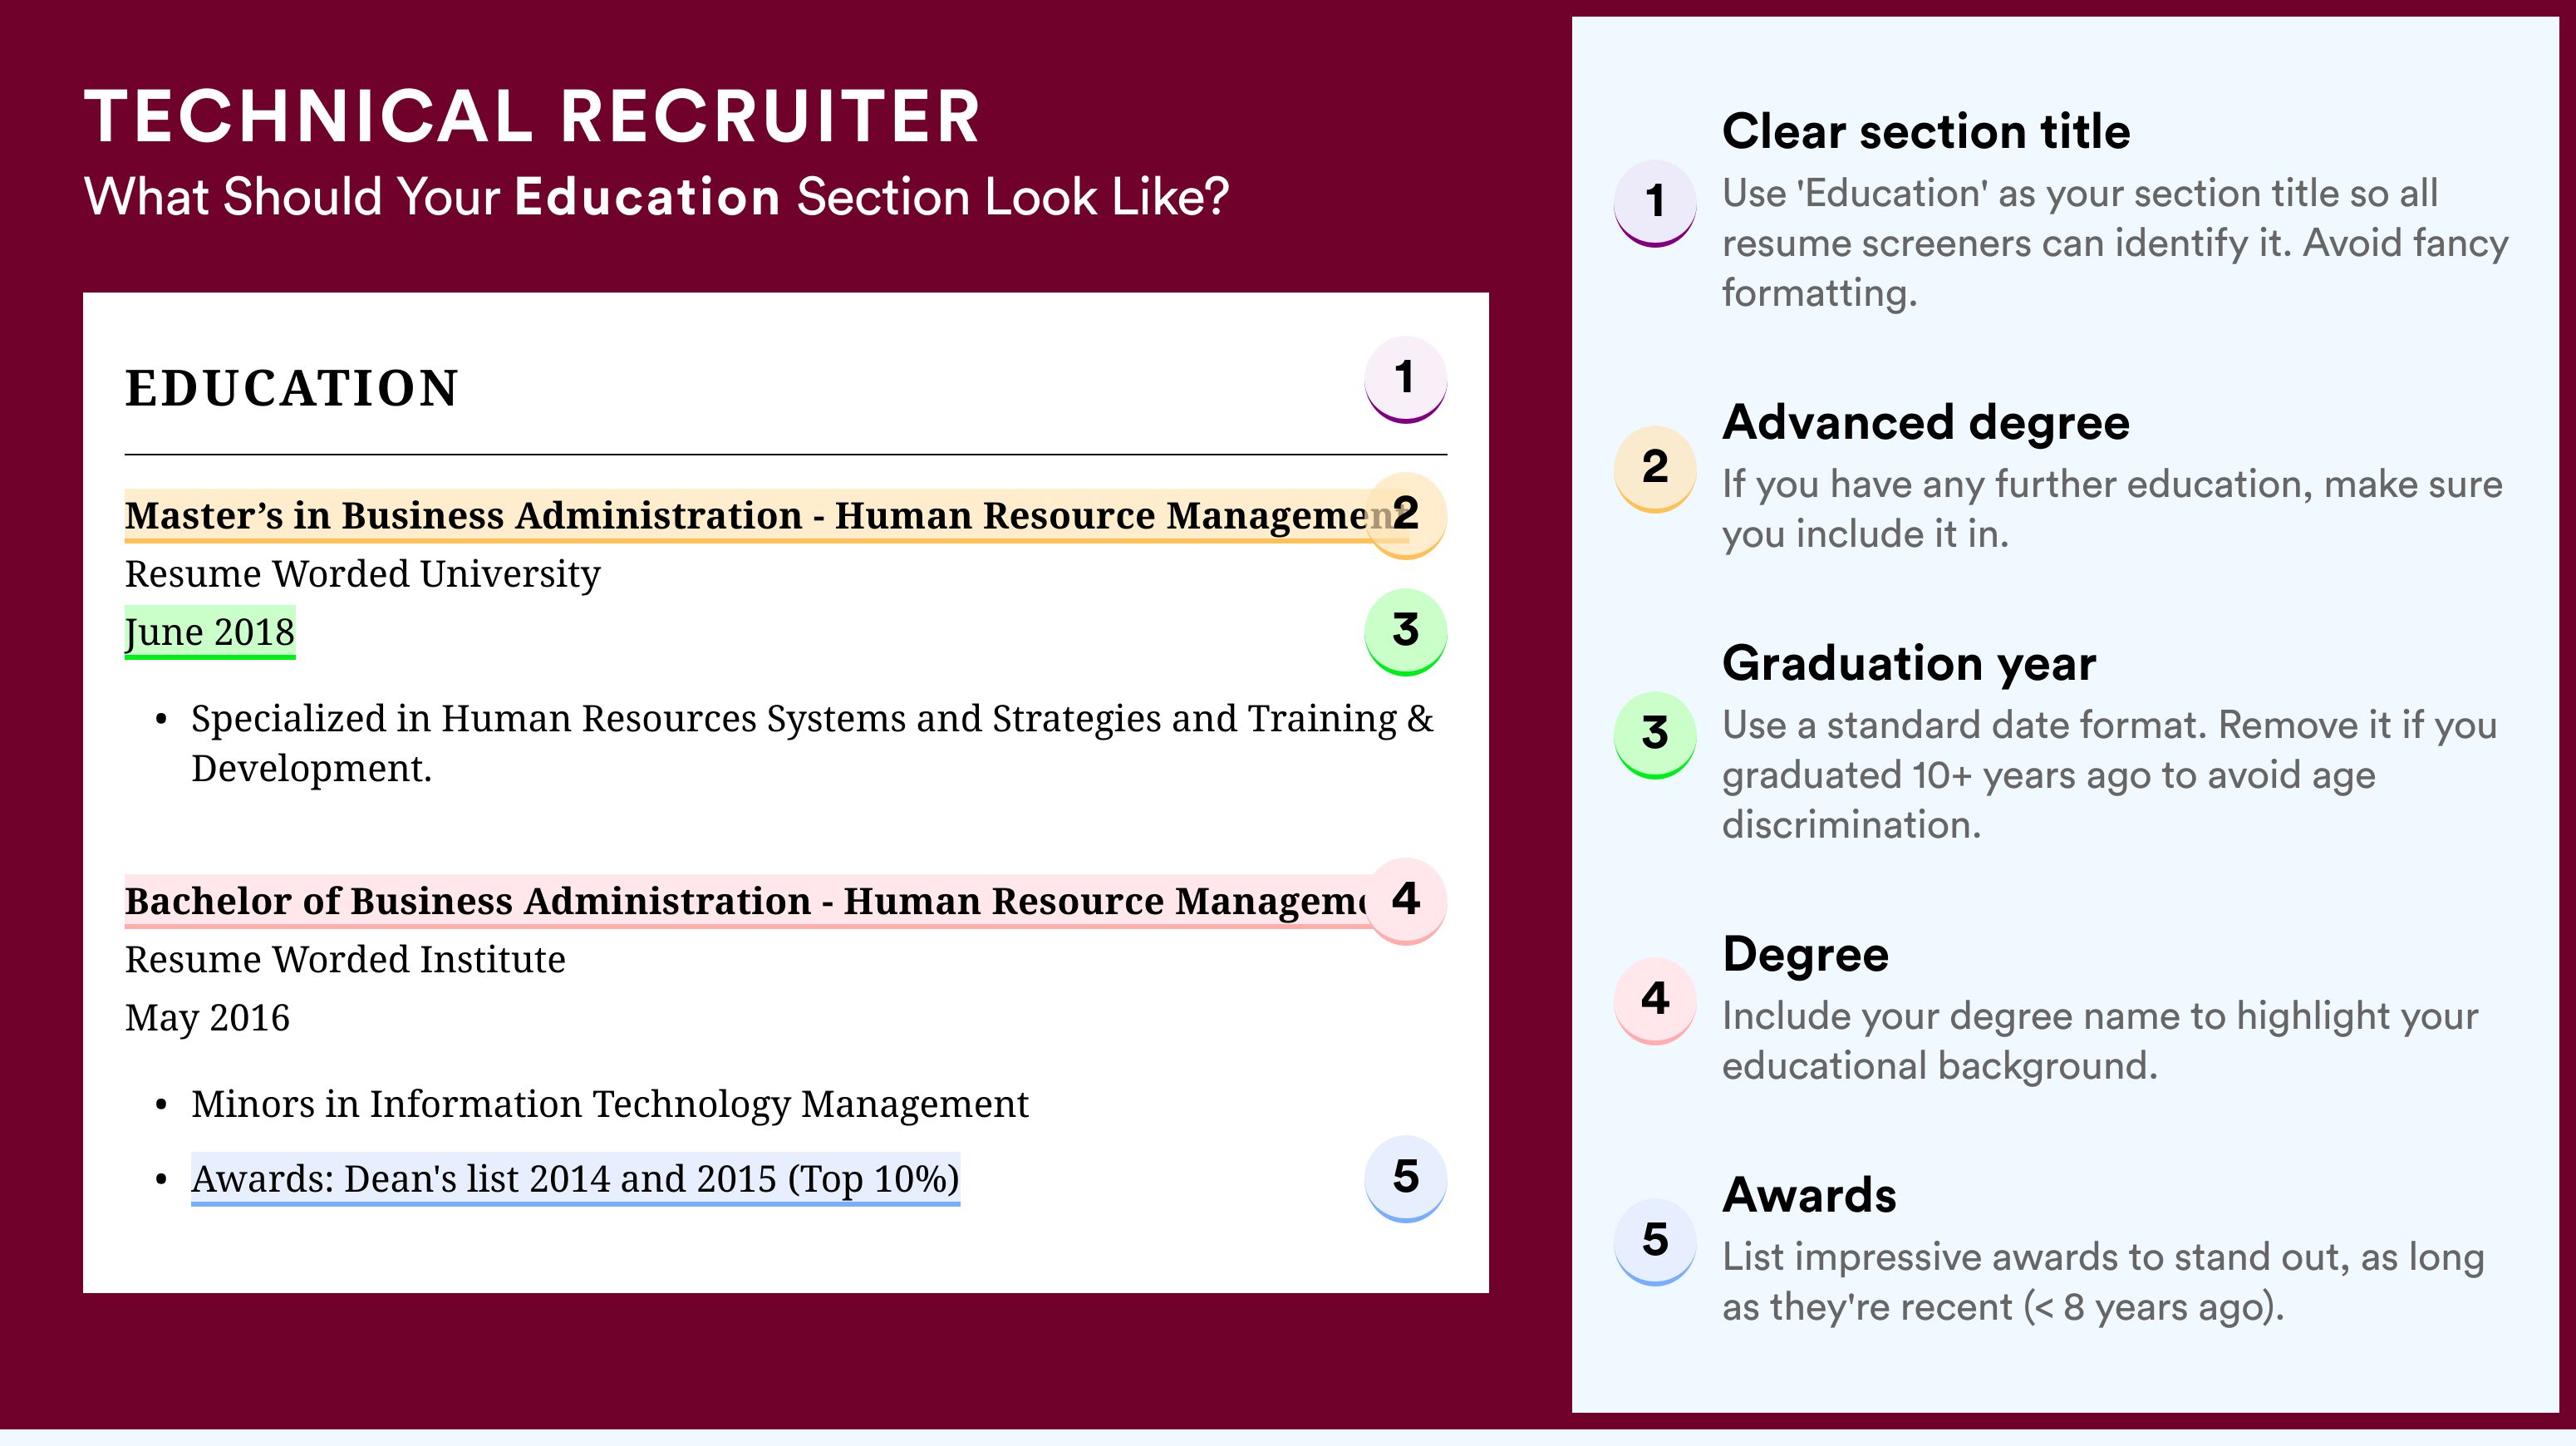 How To Write An Education Section - Technical Recruiter Roles